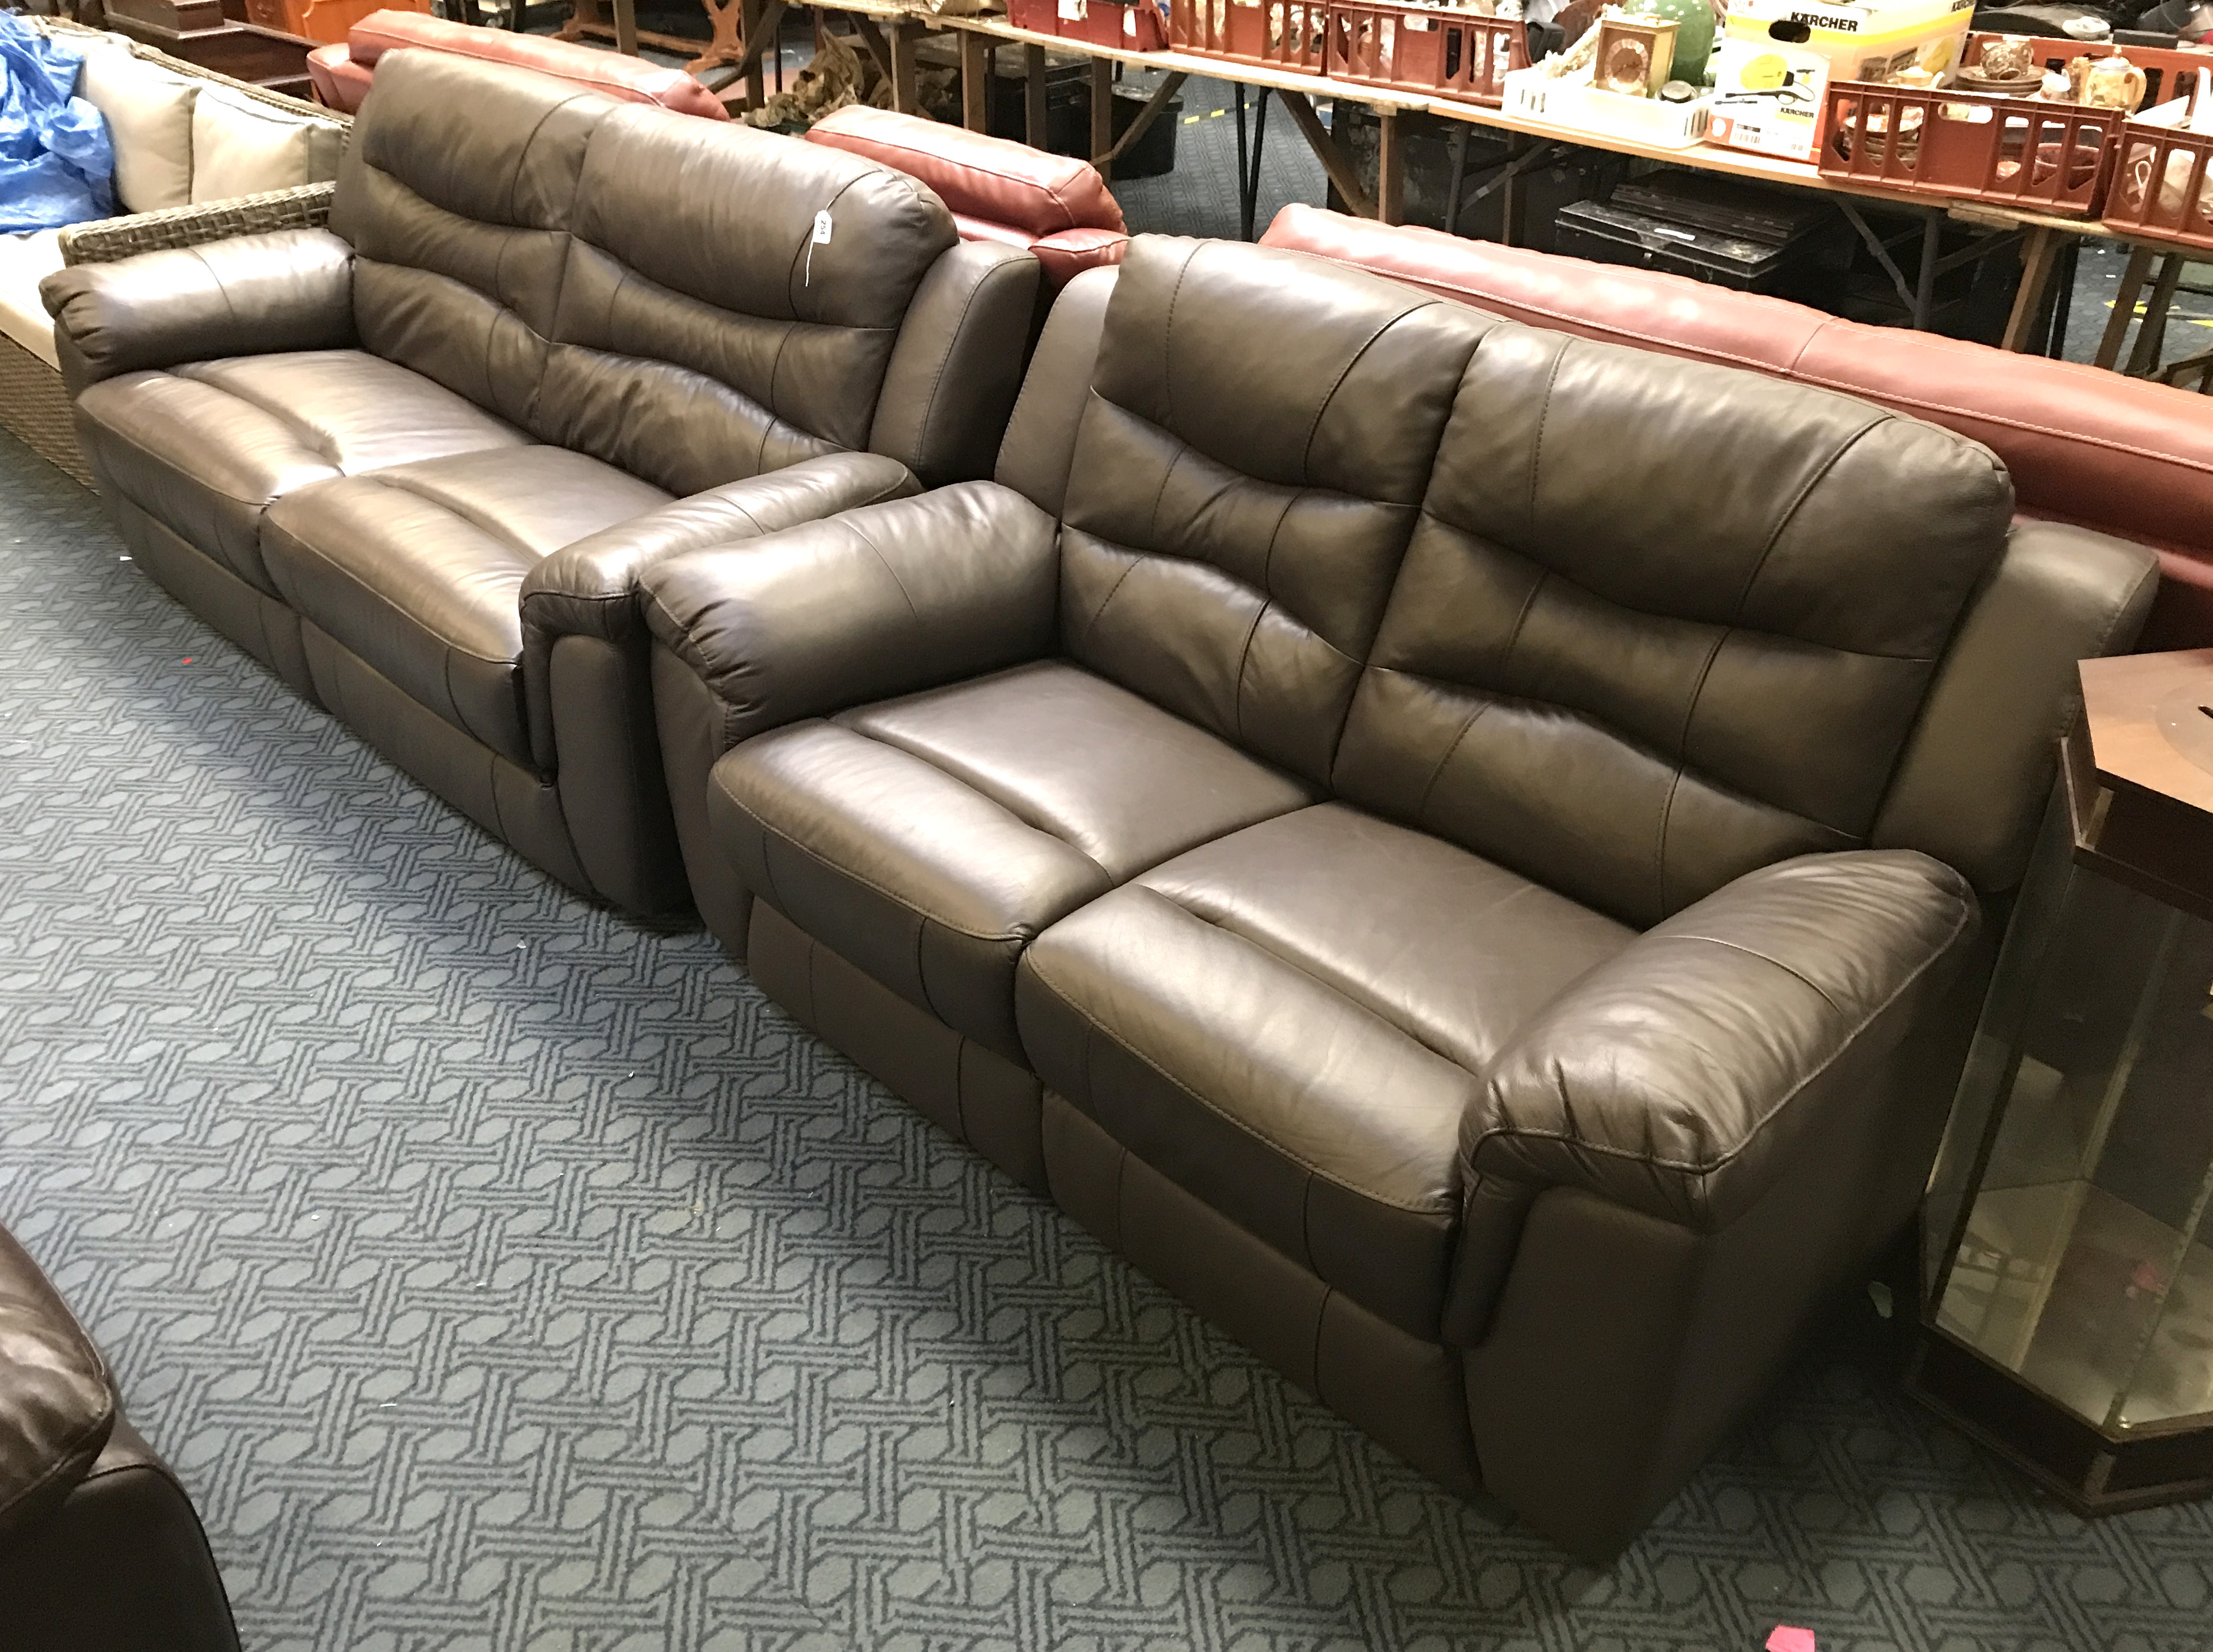 SCS ASHLEY MANOR AXEL BROWN LEATHER 3 SEATER & 2 SEATER SOFAS